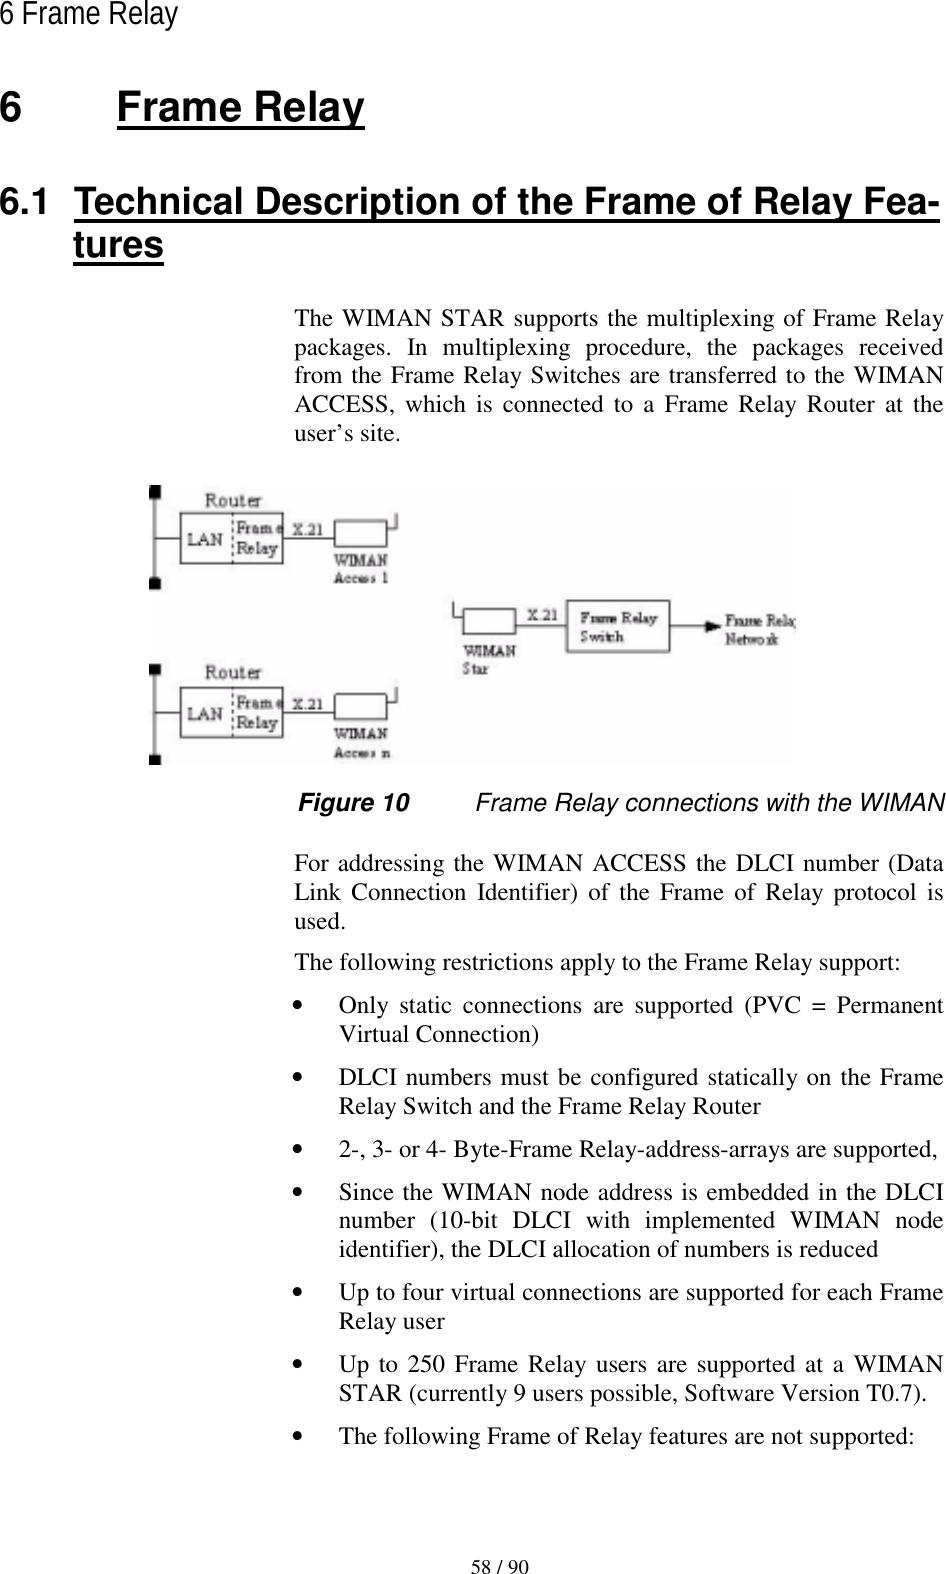   58 / 90 6 Frame Relay  6 Frame Relay 6.1  Technical Description of the Frame of Relay Fea-tures The WIMAN STAR supports the multiplexing of Frame Relay packages. In multiplexing procedure, the packages received from the Frame Relay Switches are transferred to the WIMAN ACCESS, which is connected to a Frame Relay Router at the user’s site.  Figure 10  Frame Relay connections with the WIMAN For addressing the WIMAN ACCESS the DLCI number (Data Link Connection Identifier) of the Frame of Relay protocol is used. The following restrictions apply to the Frame Relay support: •  Only static connections are supported (PVC = Permanent Virtual Connection) •  DLCI numbers must be configured statically on the Frame Relay Switch and the Frame Relay Router •  2-, 3- or 4- Byte-Frame Relay-address-arrays are supported, •  Since the WIMAN node address is embedded in the DLCI number (10-bit DLCI with implemented WIMAN node identifier), the DLCI allocation of numbers is reduced •  Up to four virtual connections are supported for each Frame Relay user •  Up to 250 Frame Relay users are supported at a WIMAN STAR (currently 9 users possible, Software Version T0.7). •  The following Frame of Relay features are not supported: 